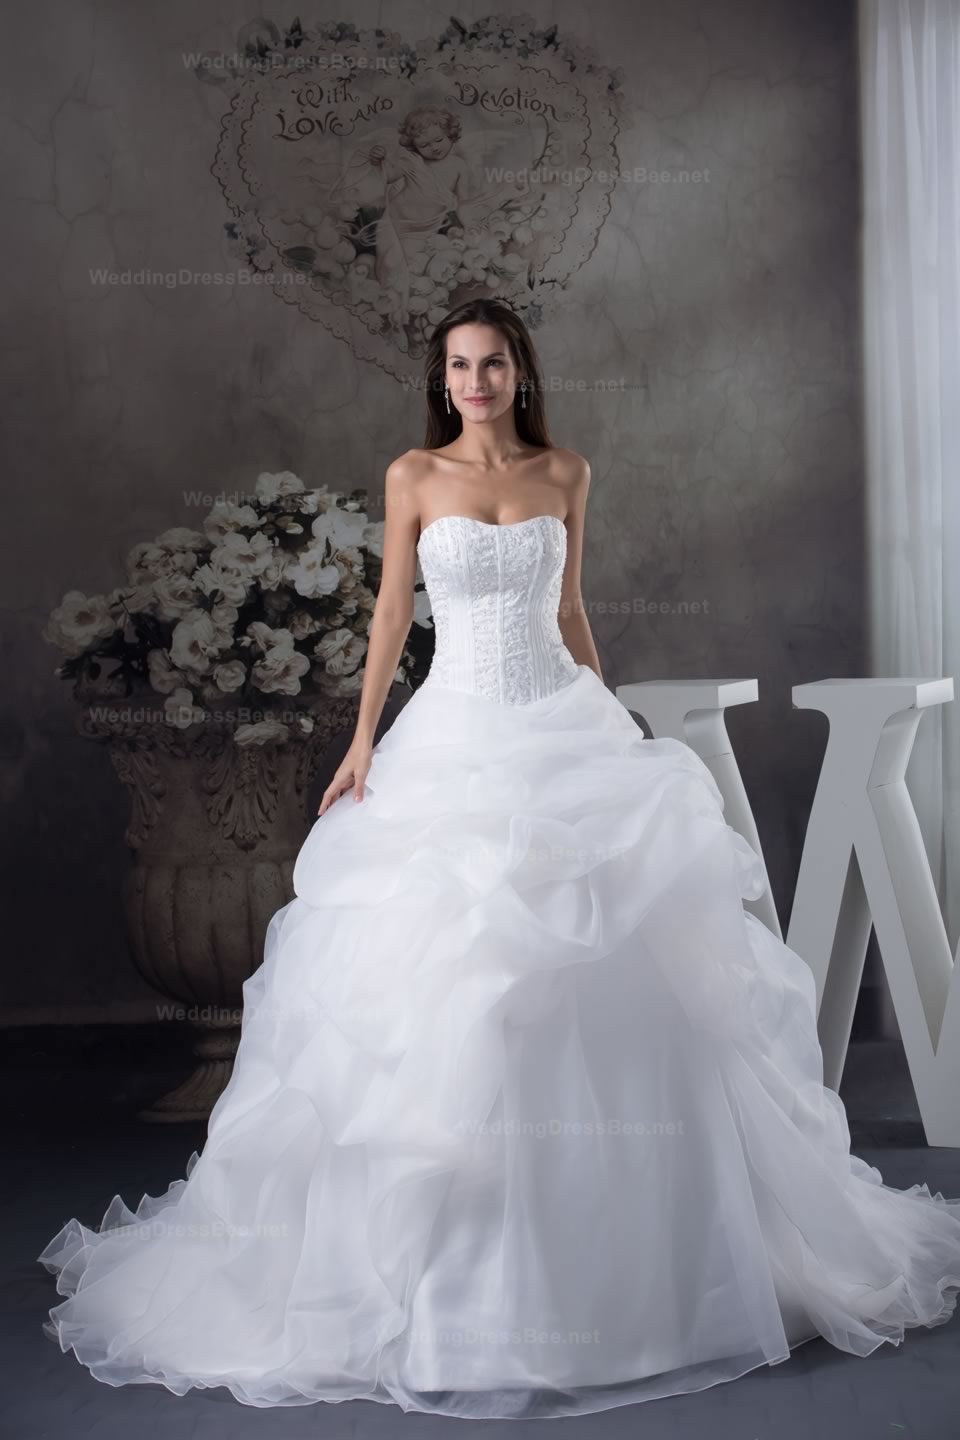 Strapless beaded embroidery top ruffled organza wedding dress. Ohhh love this!